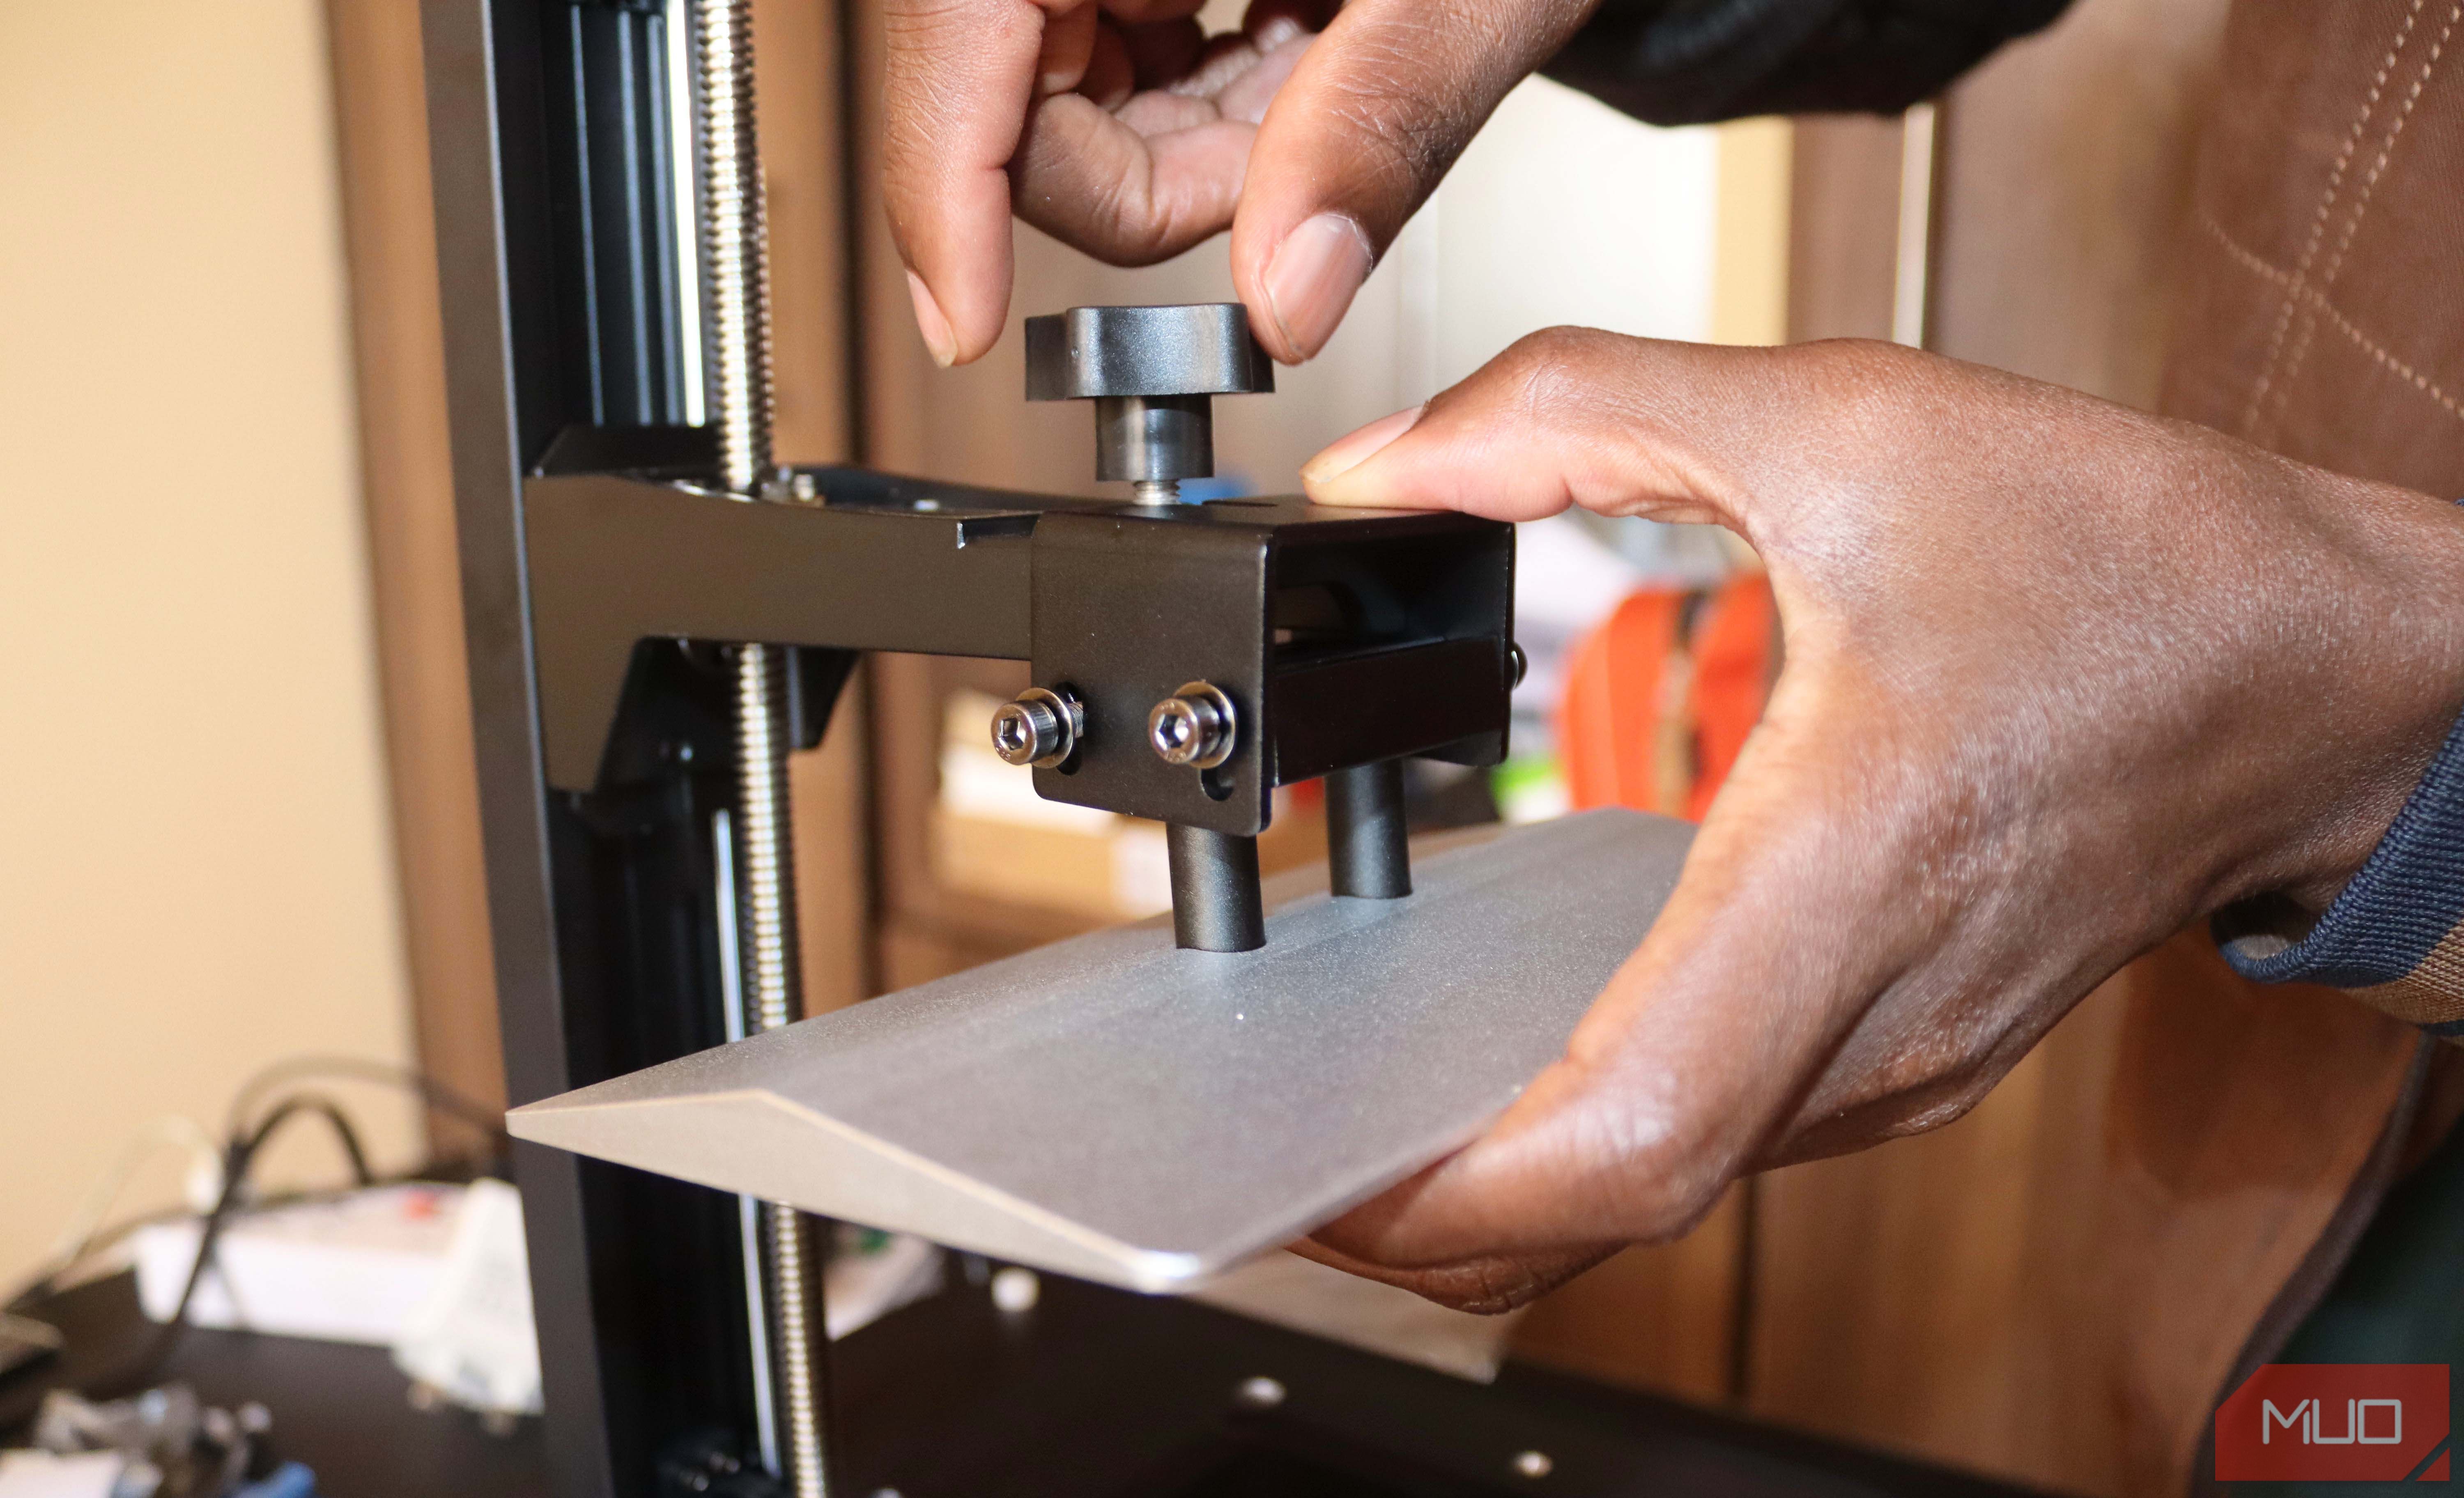 Leveling the build plate of a resin 3D printer